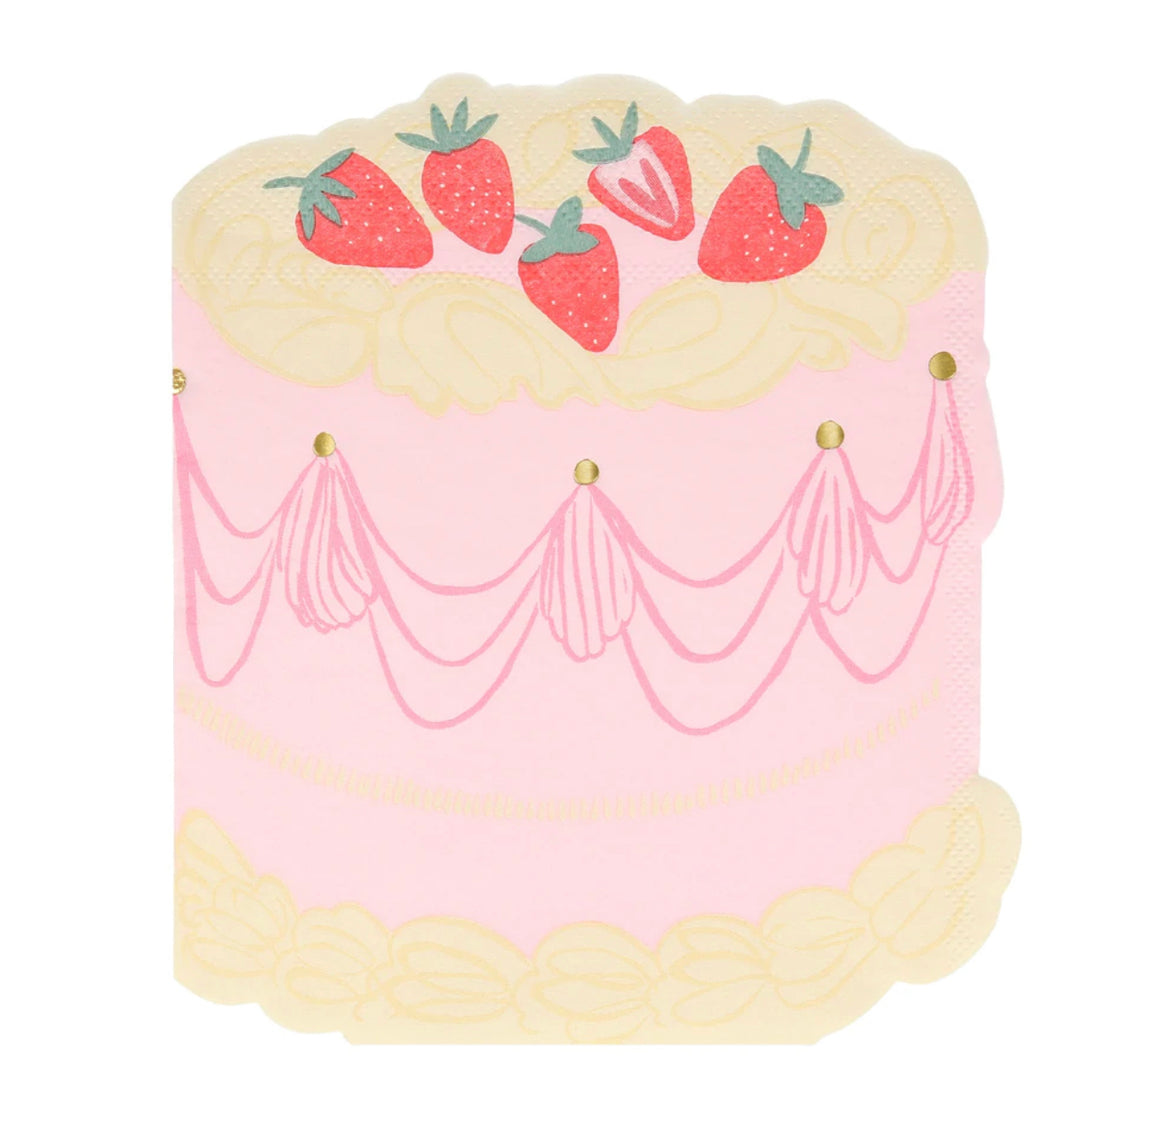 NAPKINS SMALL - SWEETS PINK CAKE